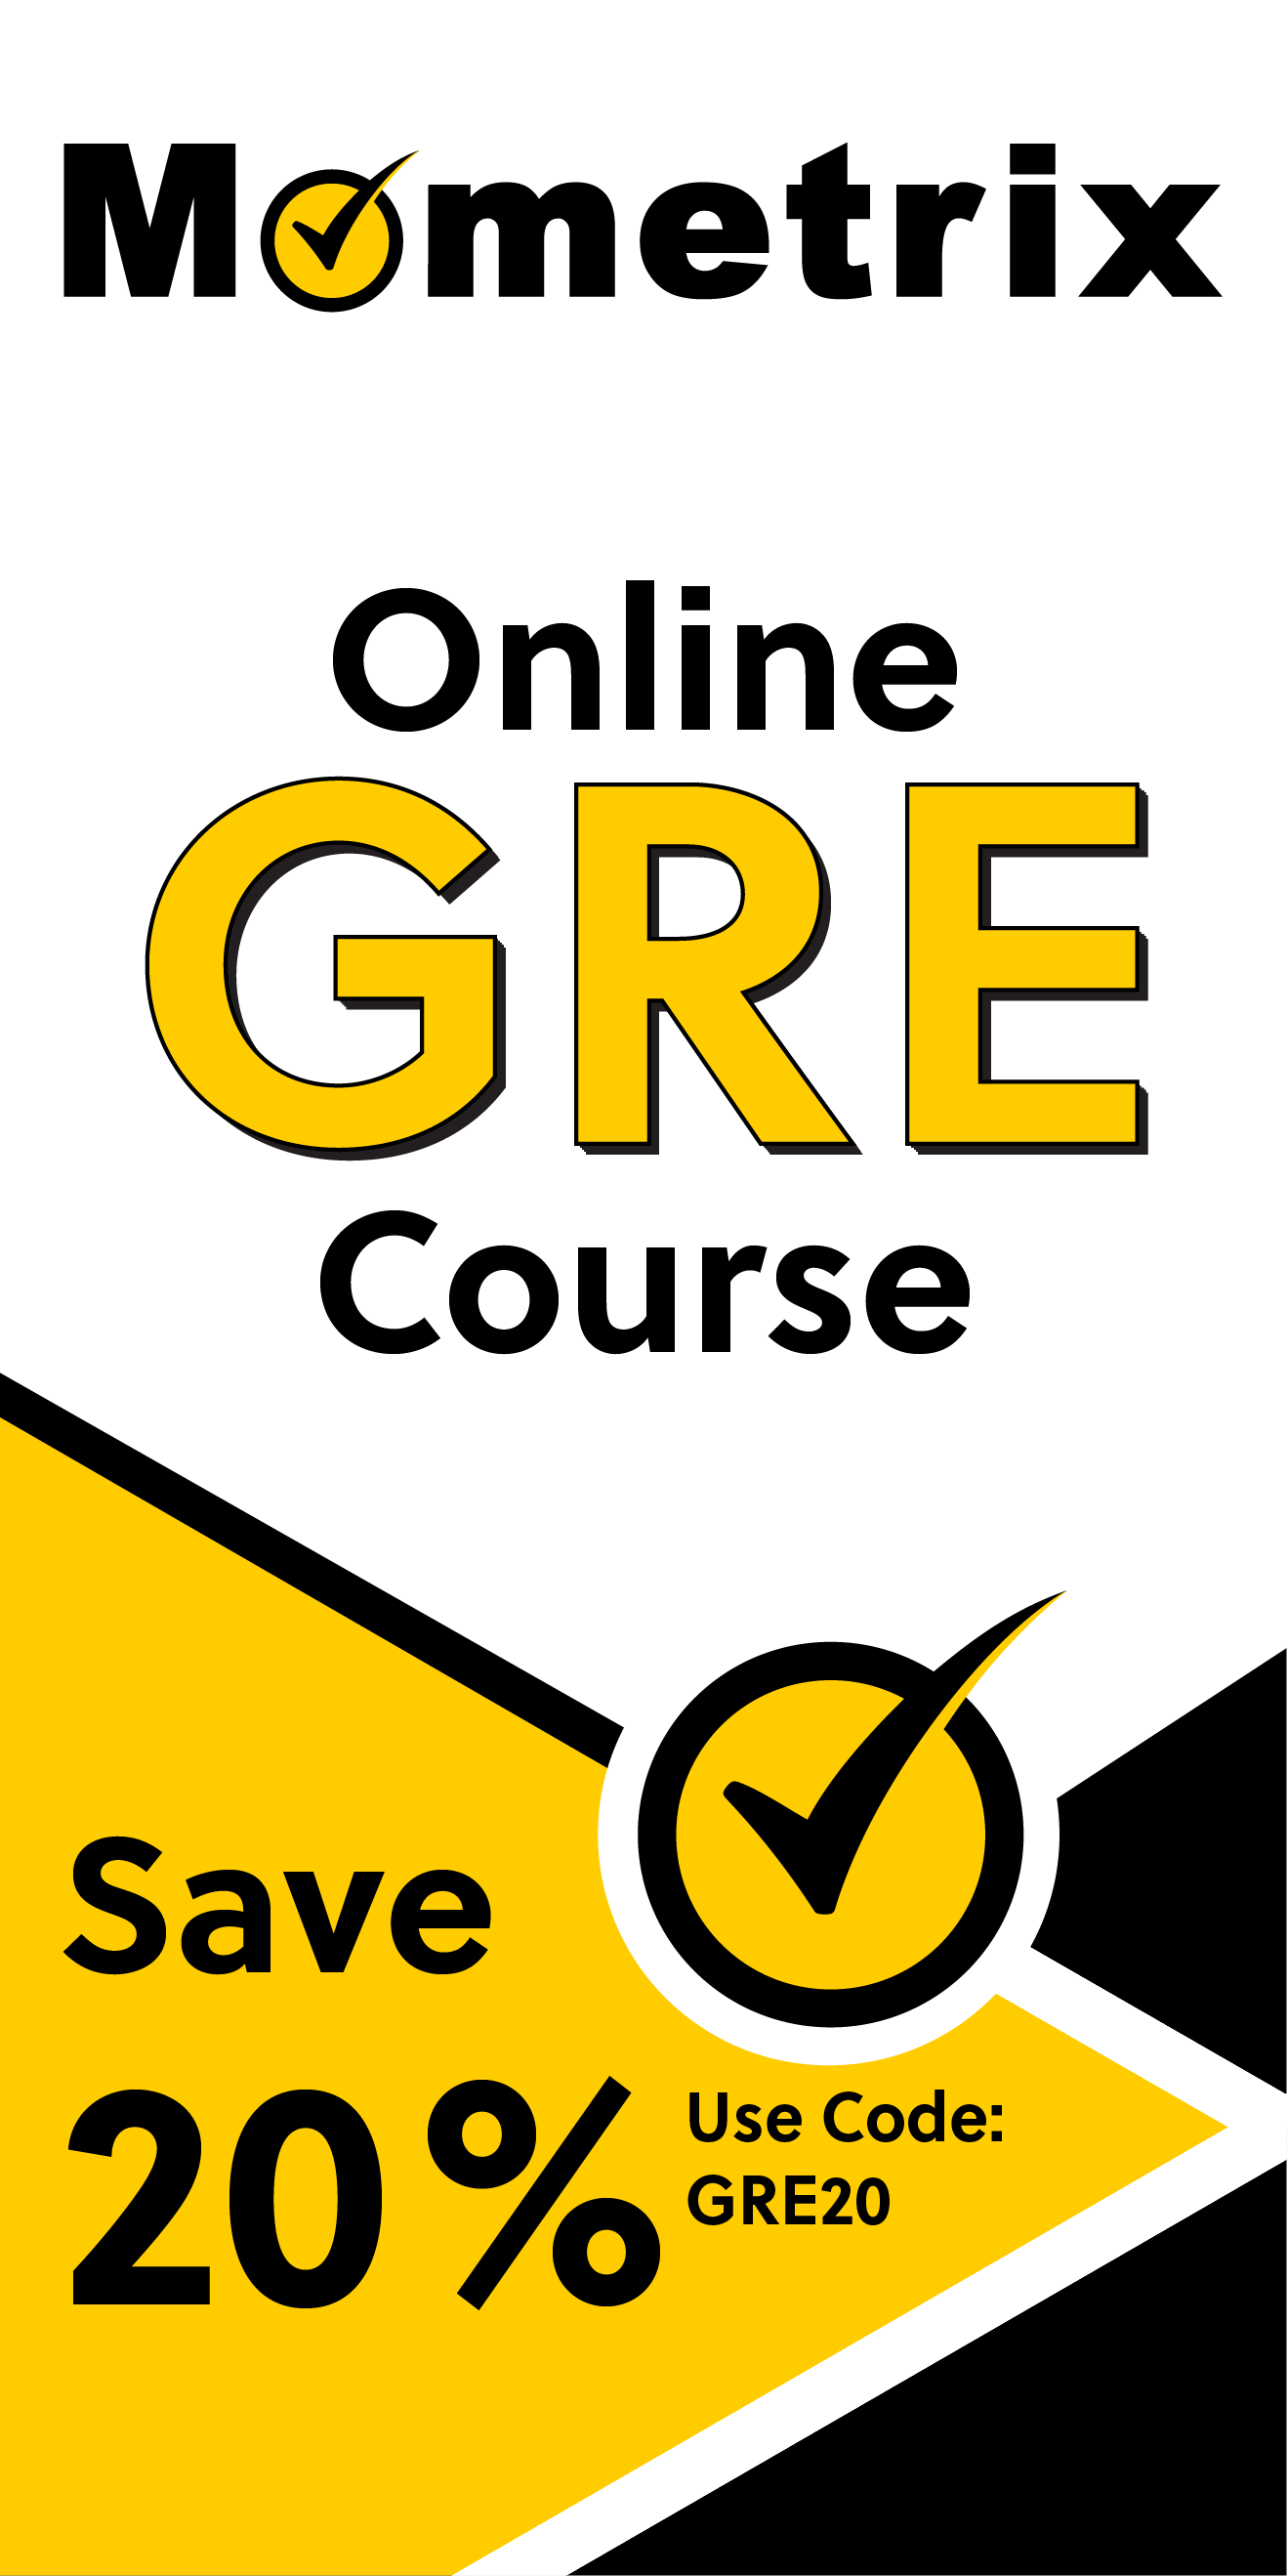 Click here for 20% off of Mometrix GRE online course. Use code: SGRE20